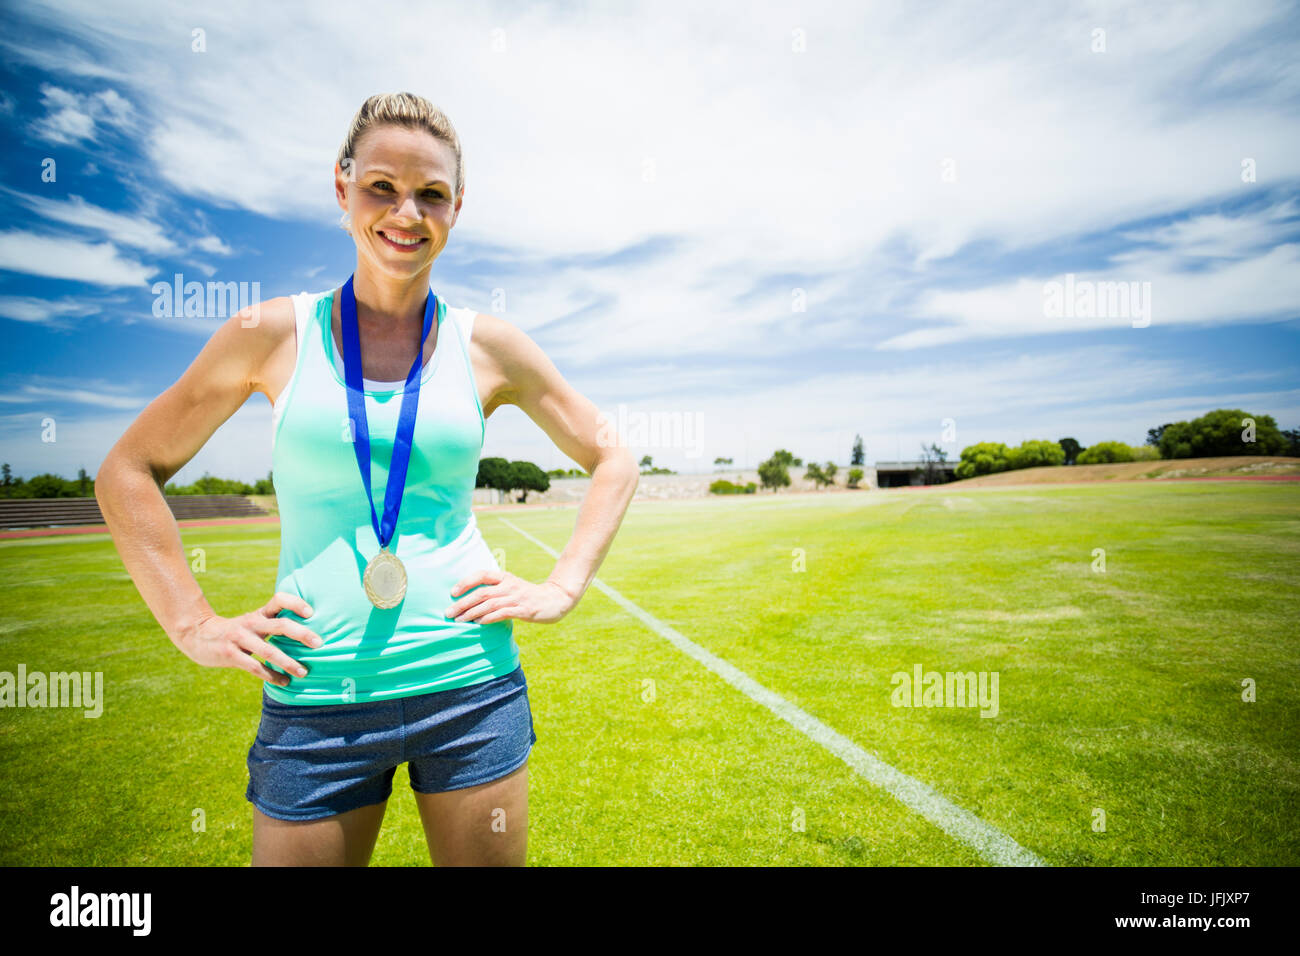 Portrait of female athlete standing with hands on hips Stock Photo